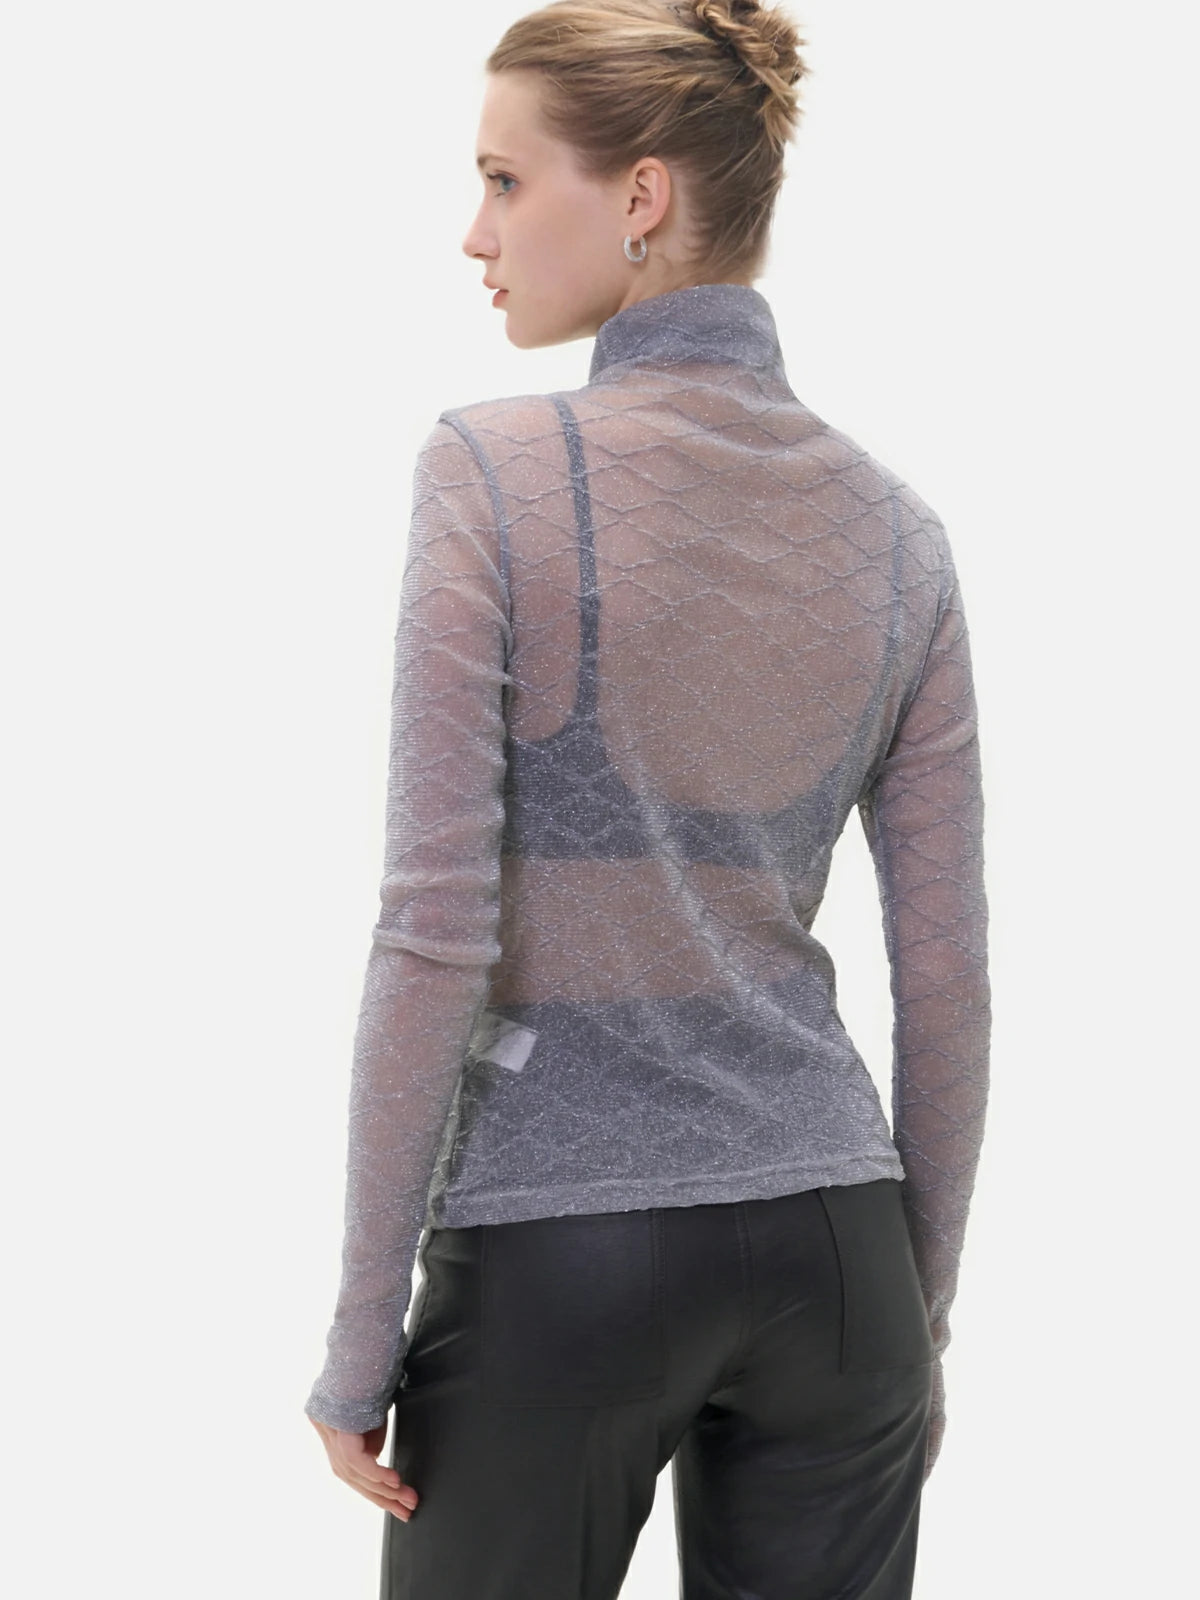 A delicate diamond-patterned sheer base layer seamlessly blends classic elegance with modern fashion trends.